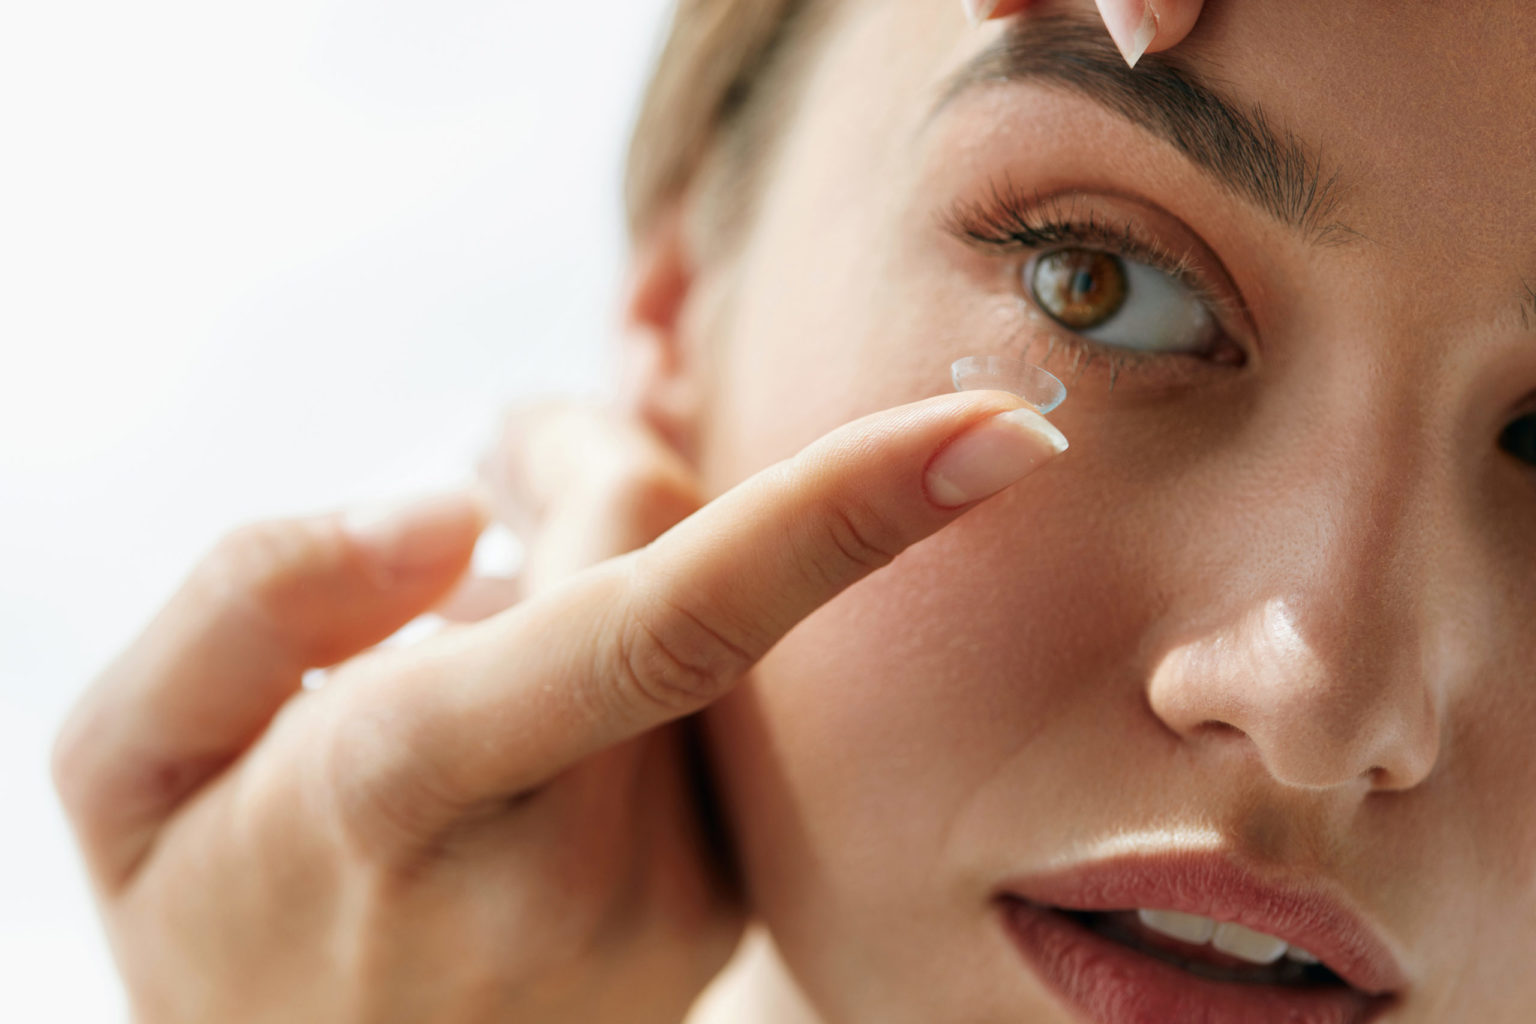 Do Your Contact Lenses Dry And Irritate Your Eyes Lasik Can Relieve